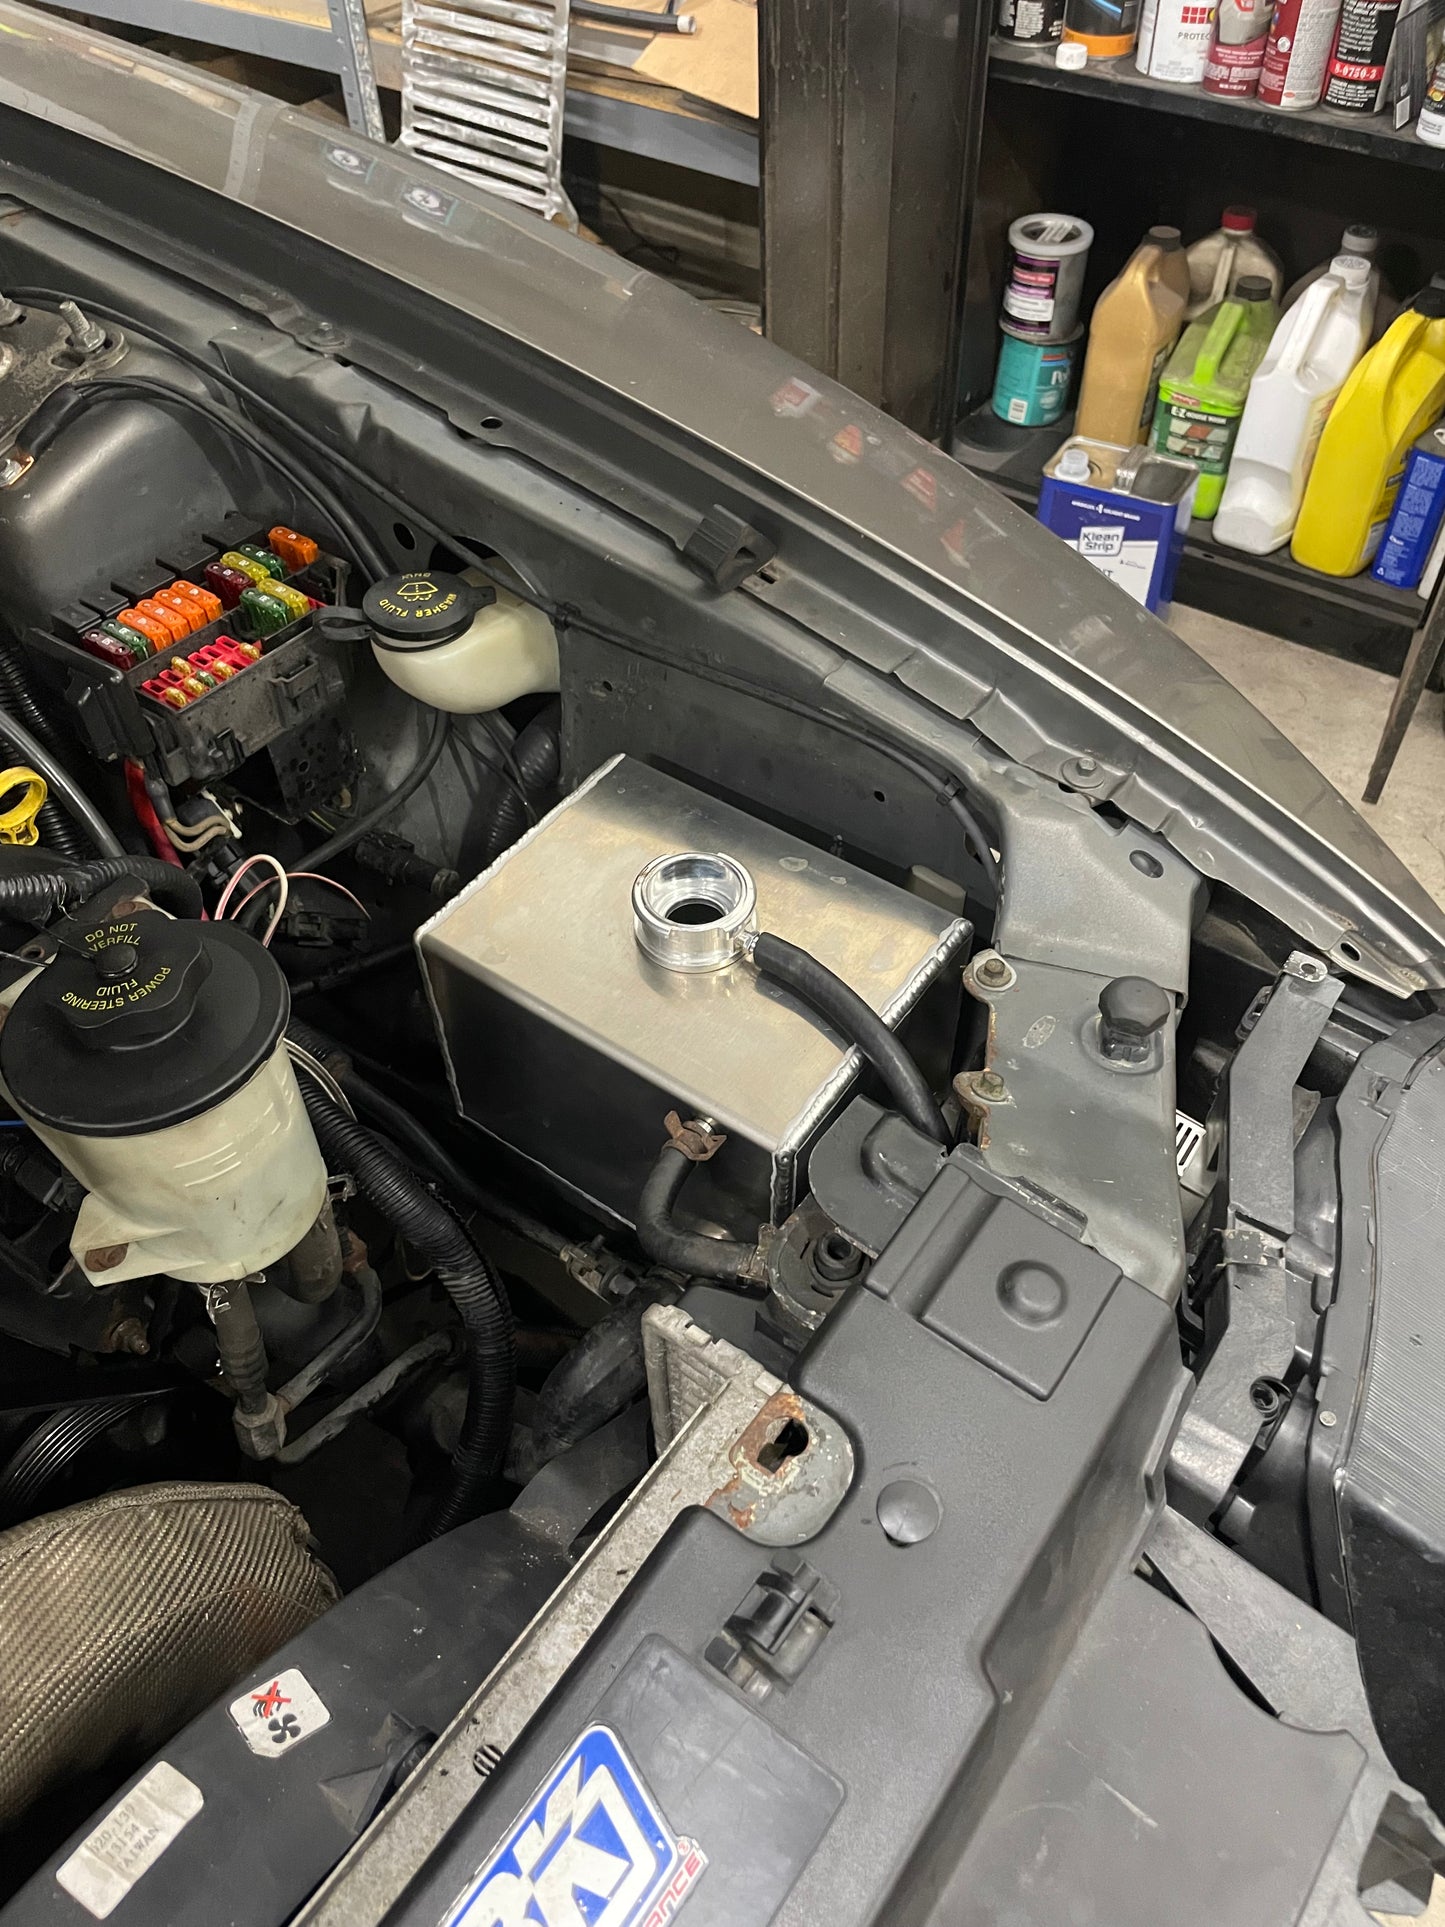 99-04 New Edge Mustang Coolant Reservoir Relocation